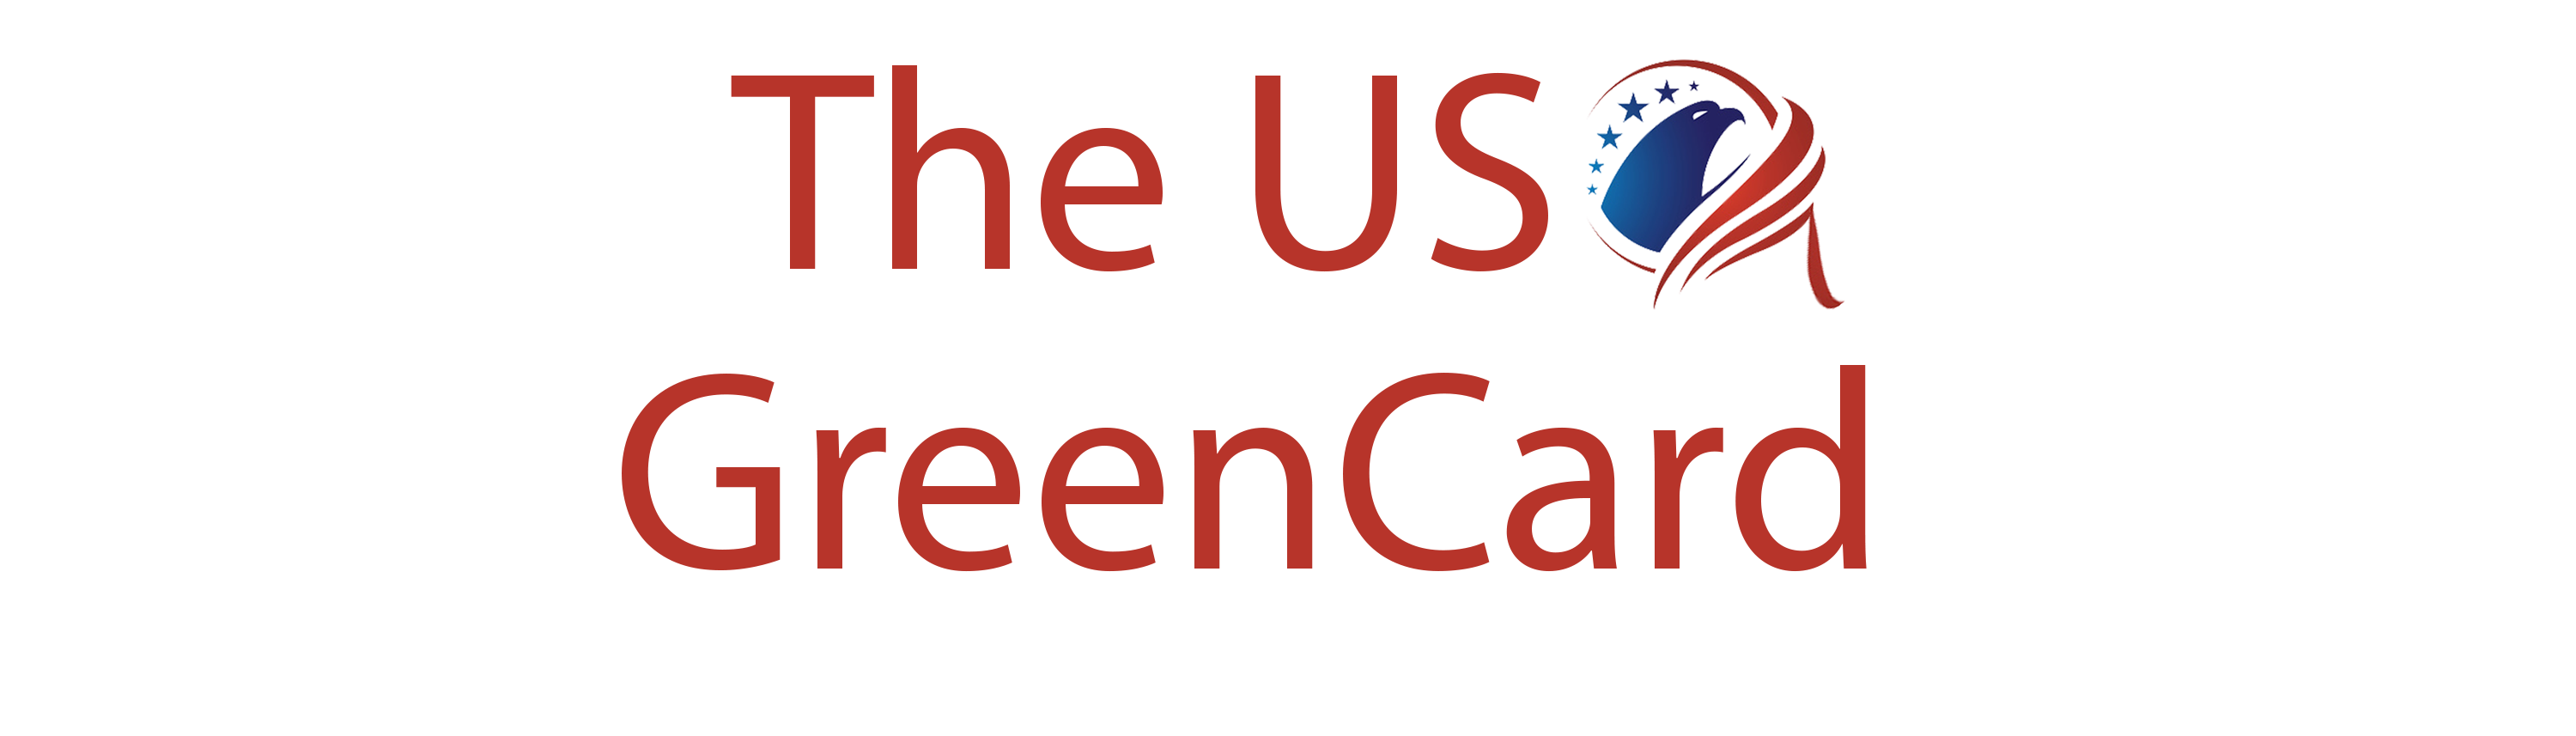 Green Card Requirements Green Card Eligibility » The US Green Card